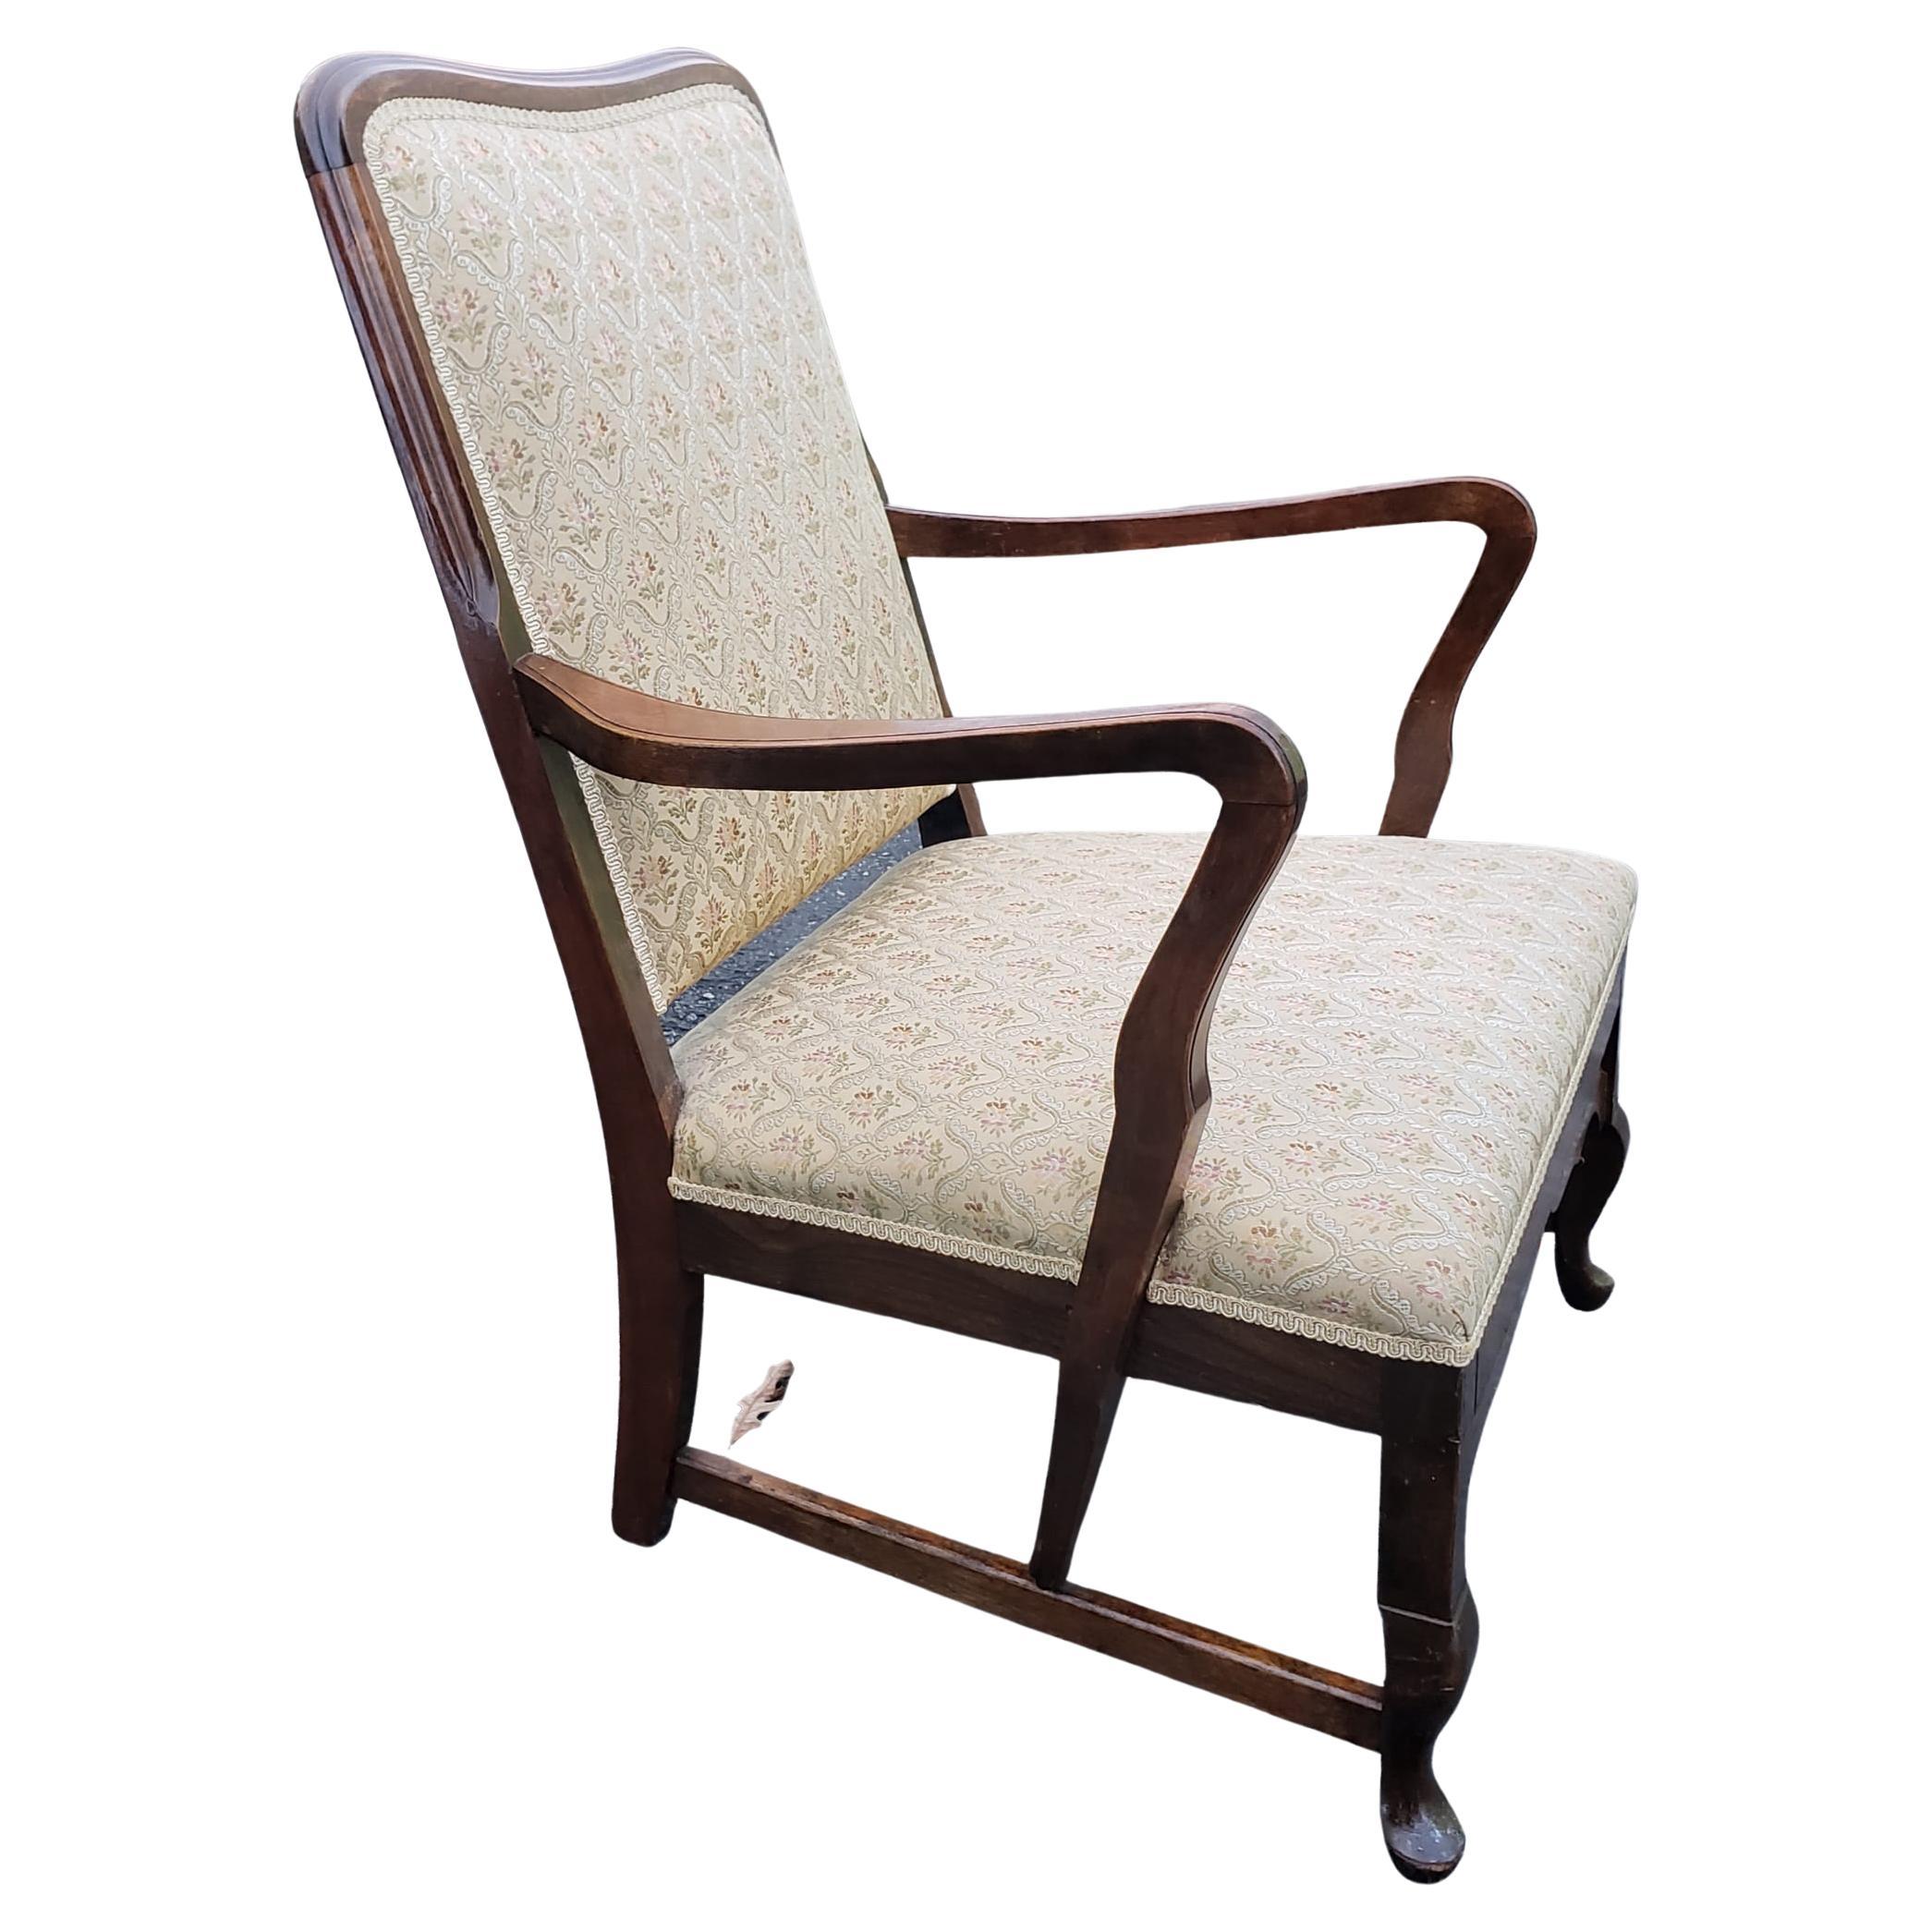 1930s Queen Anne Style Low height Walnut Upholstered Lounge chair in great vintage condition. Very clean upholstery.